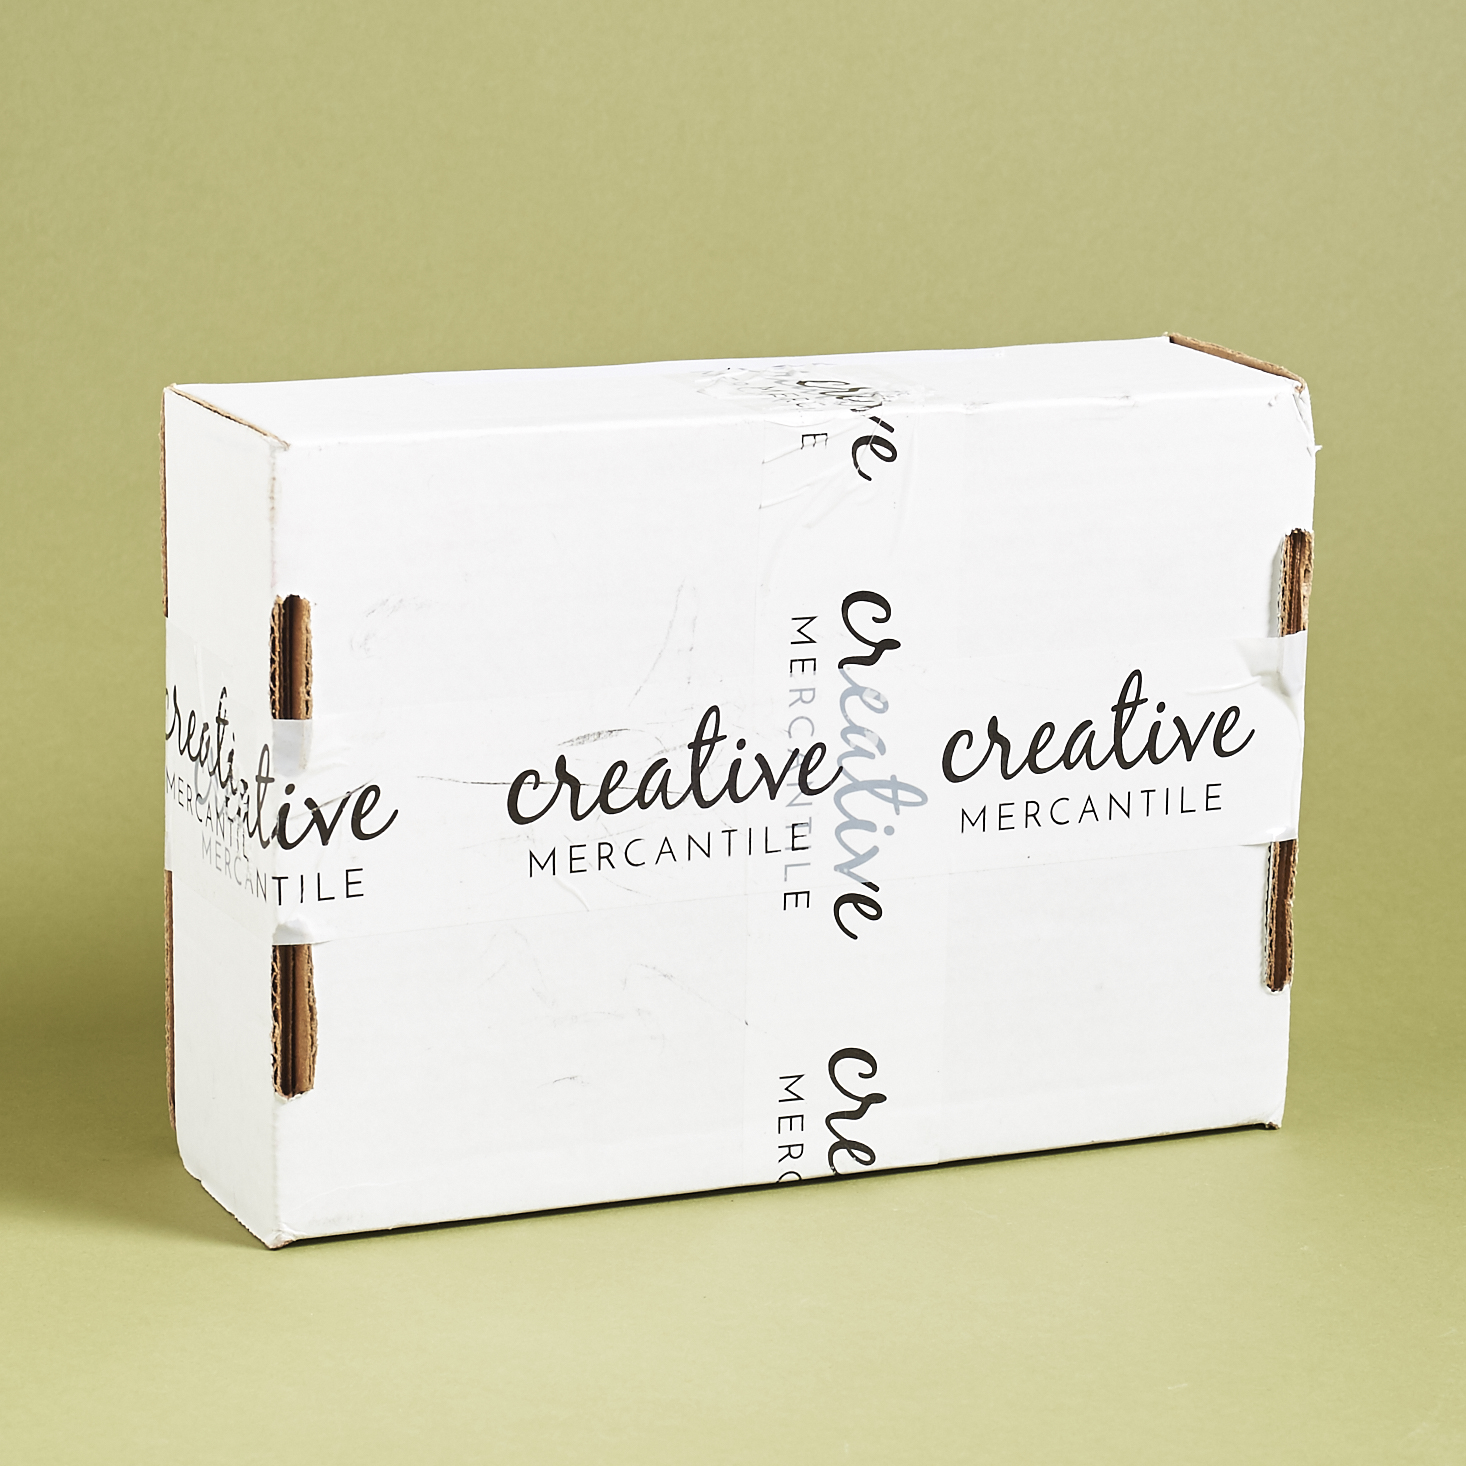 Read our review of the December 2016 Creative Mercantile Box!